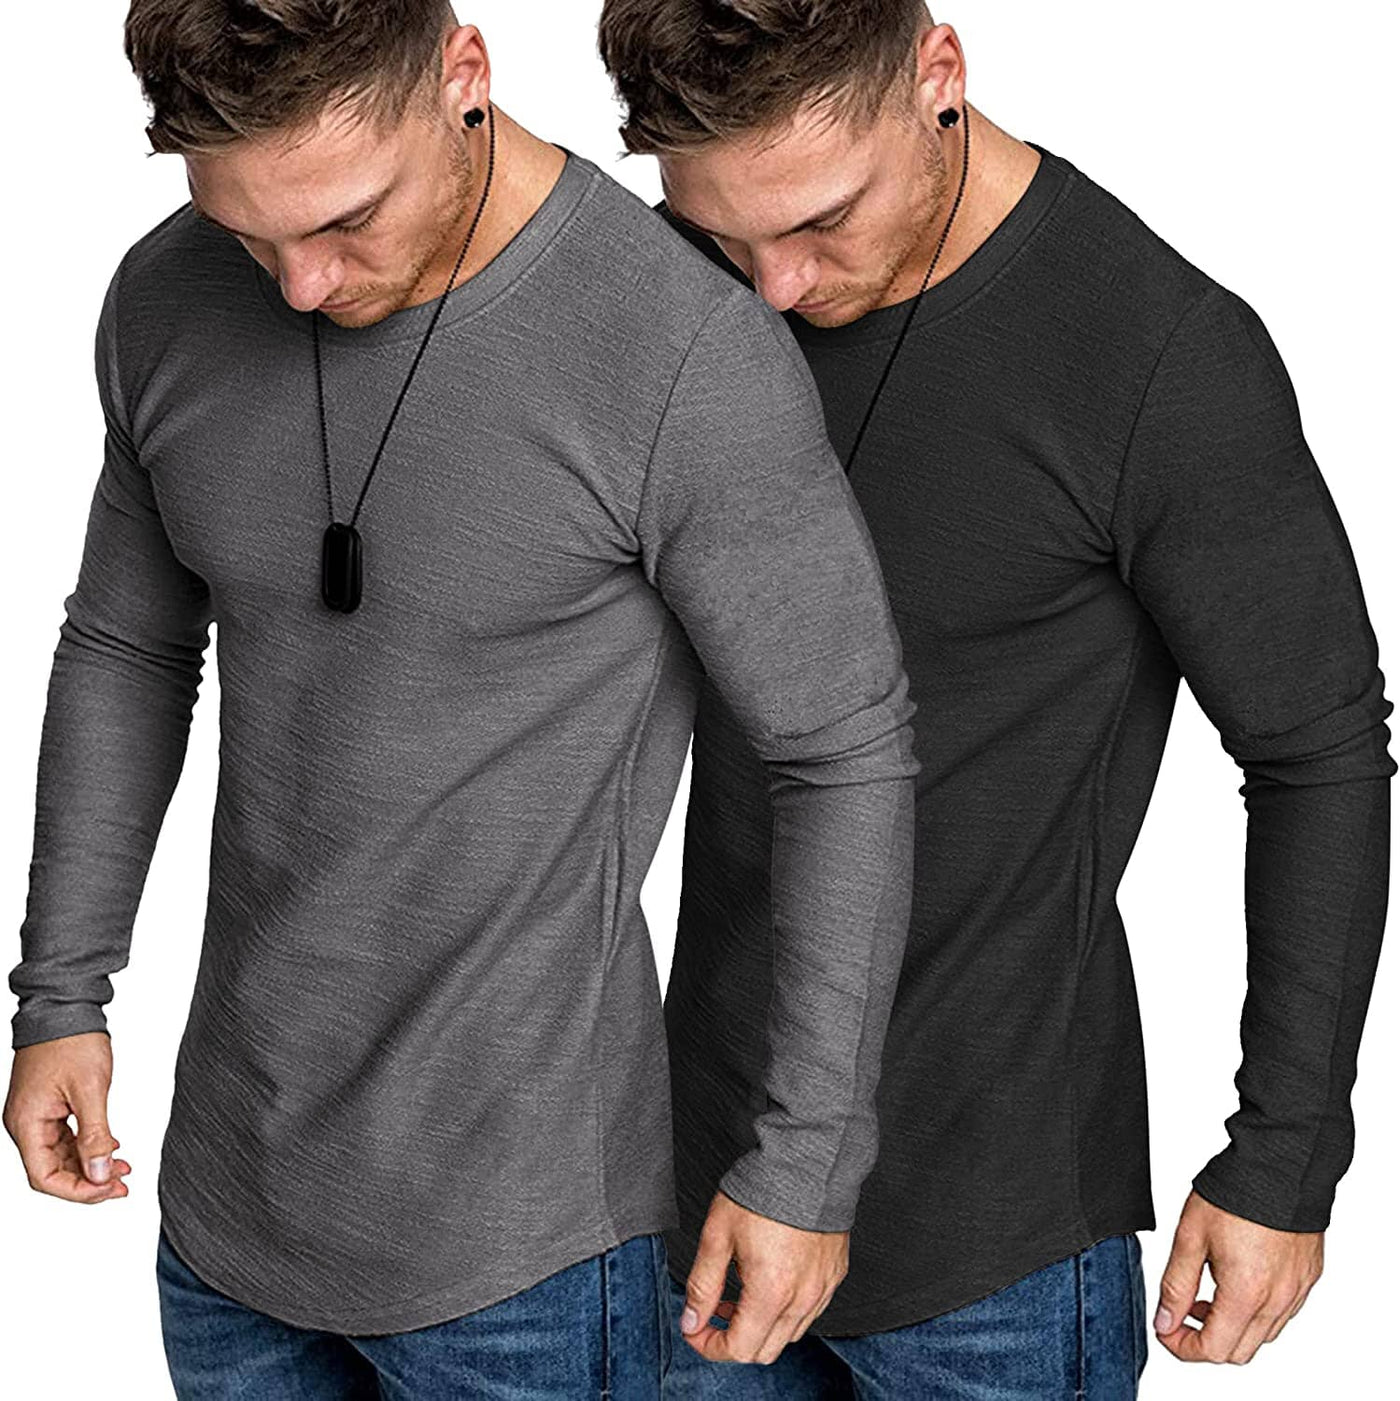 2-Pack Muscle Fitted Workout T-Shirt (US Only) T-Shirt COOFANDY Store Black/Grey S 